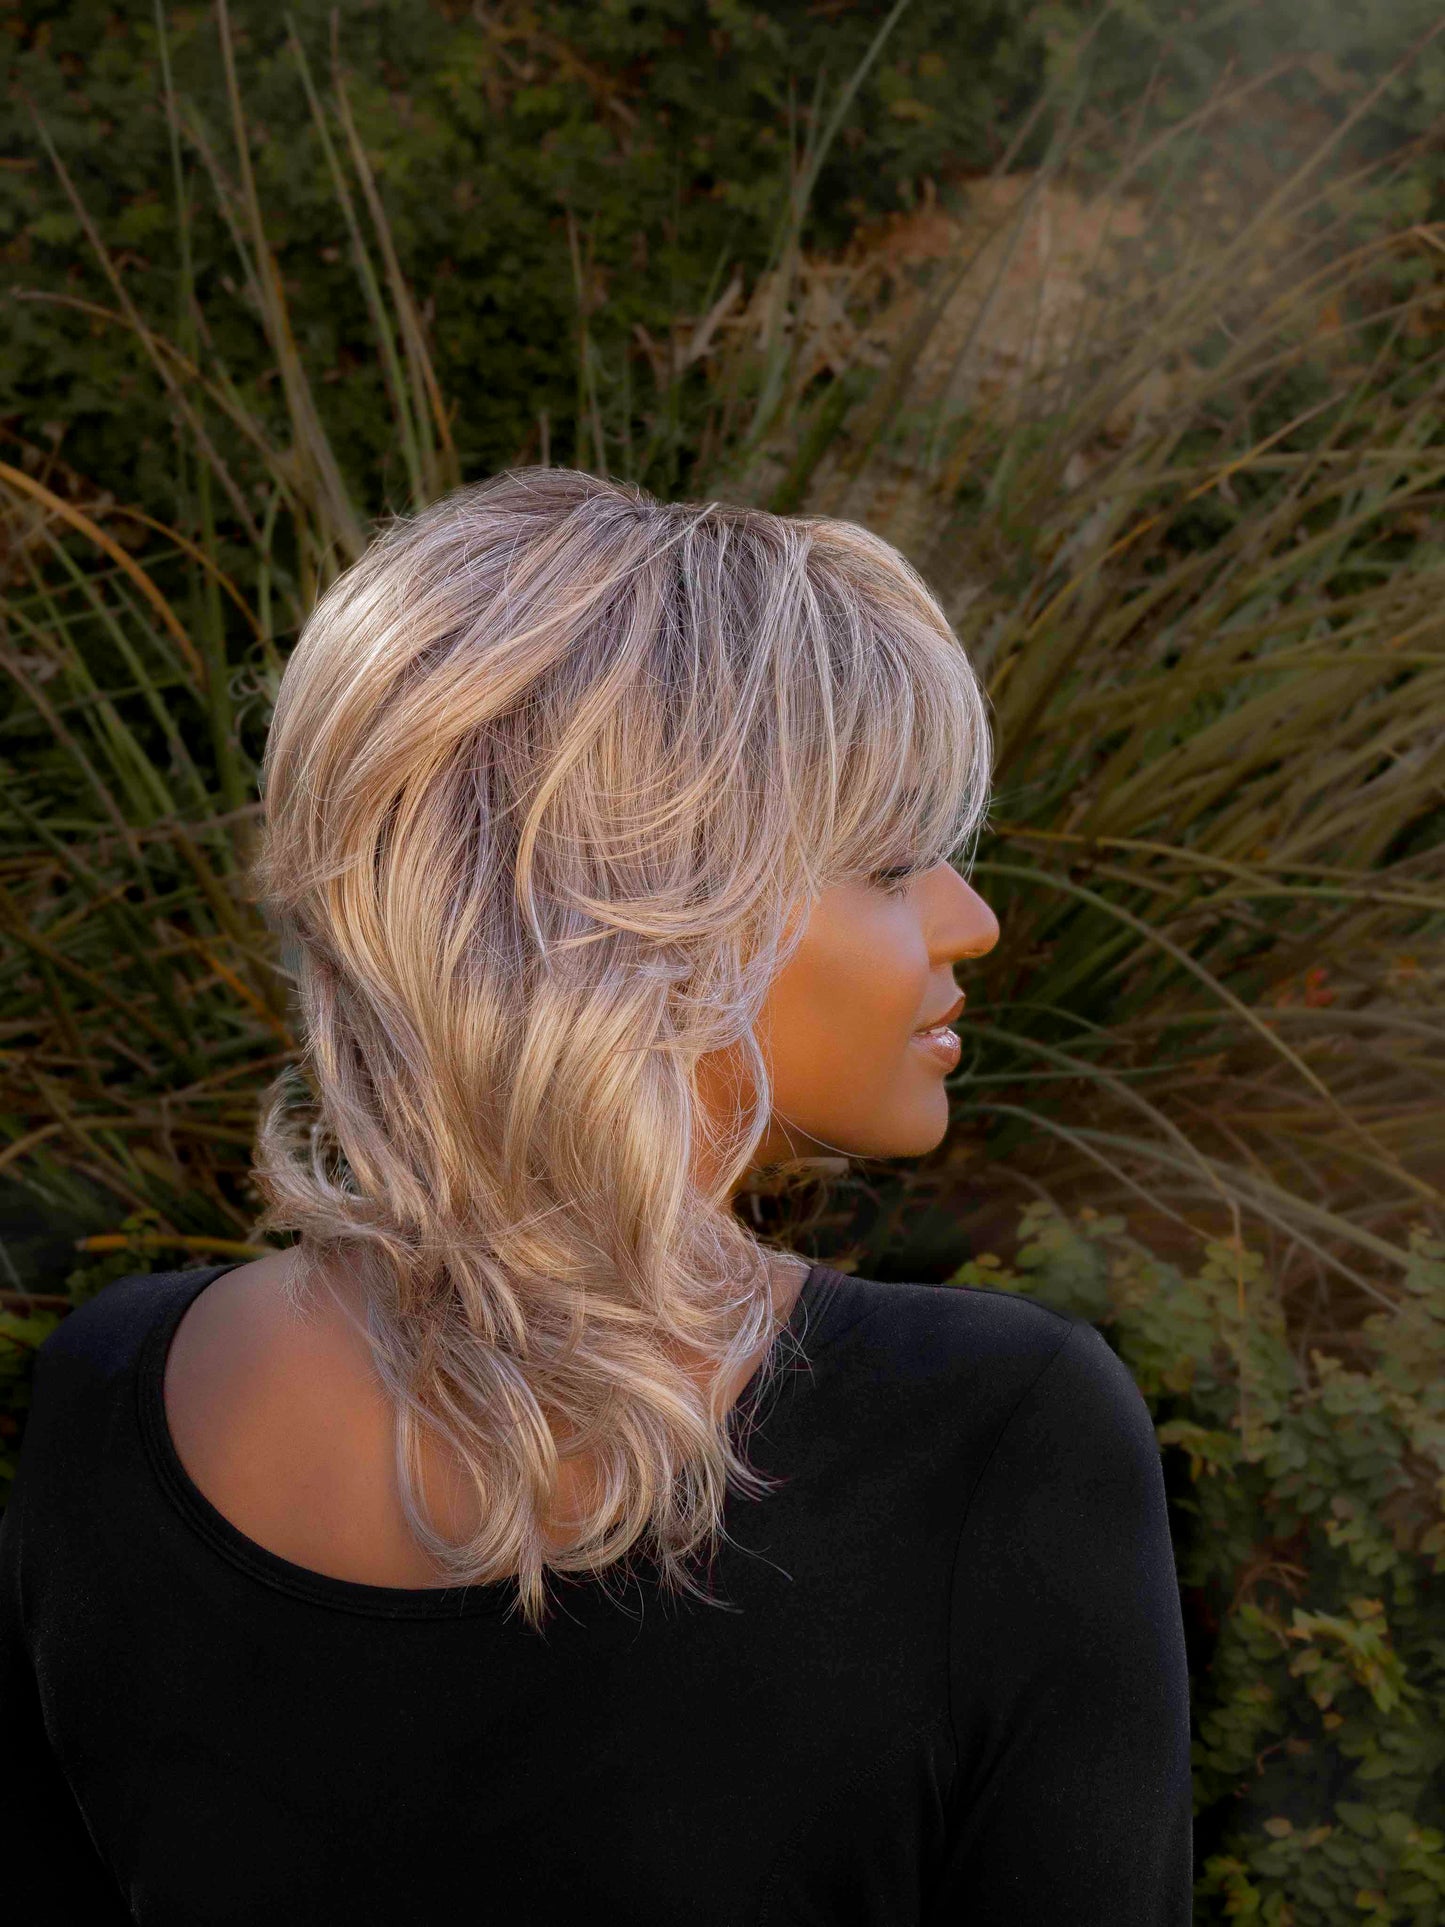 JAN by Rene of Paris in SANDY-MINK | Creamy Blonde and Sandy Tones Blended with Medium Brown Roots